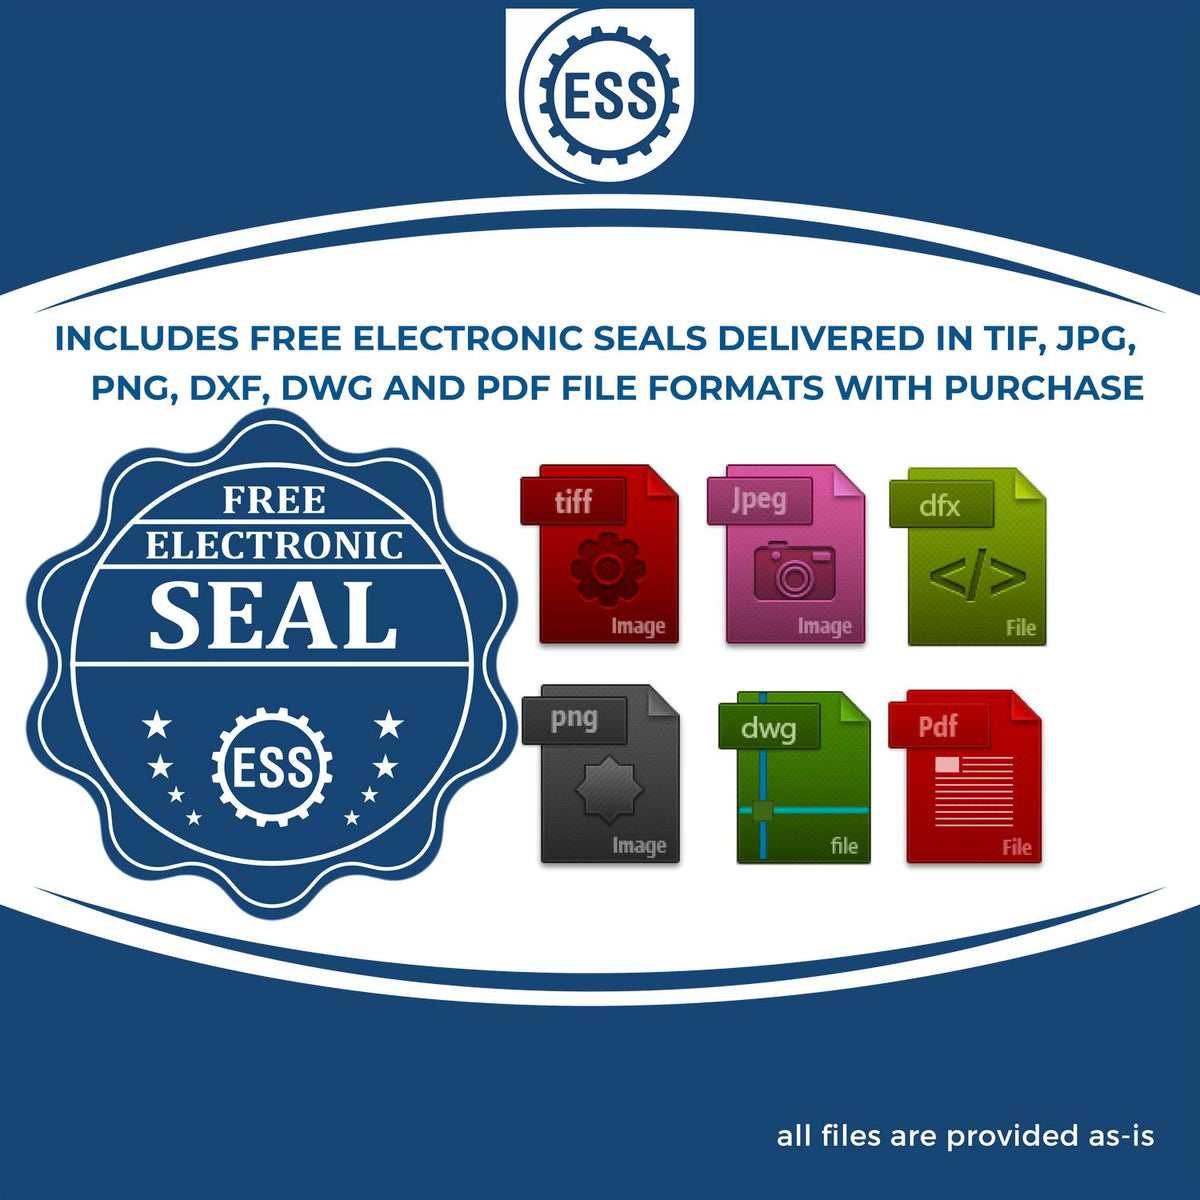 An infographic for the free electronic seal for the Long Reach Alaska PE Seal illustrating the different file type icons such as DXF, DWG, TIF, JPG and PNG.